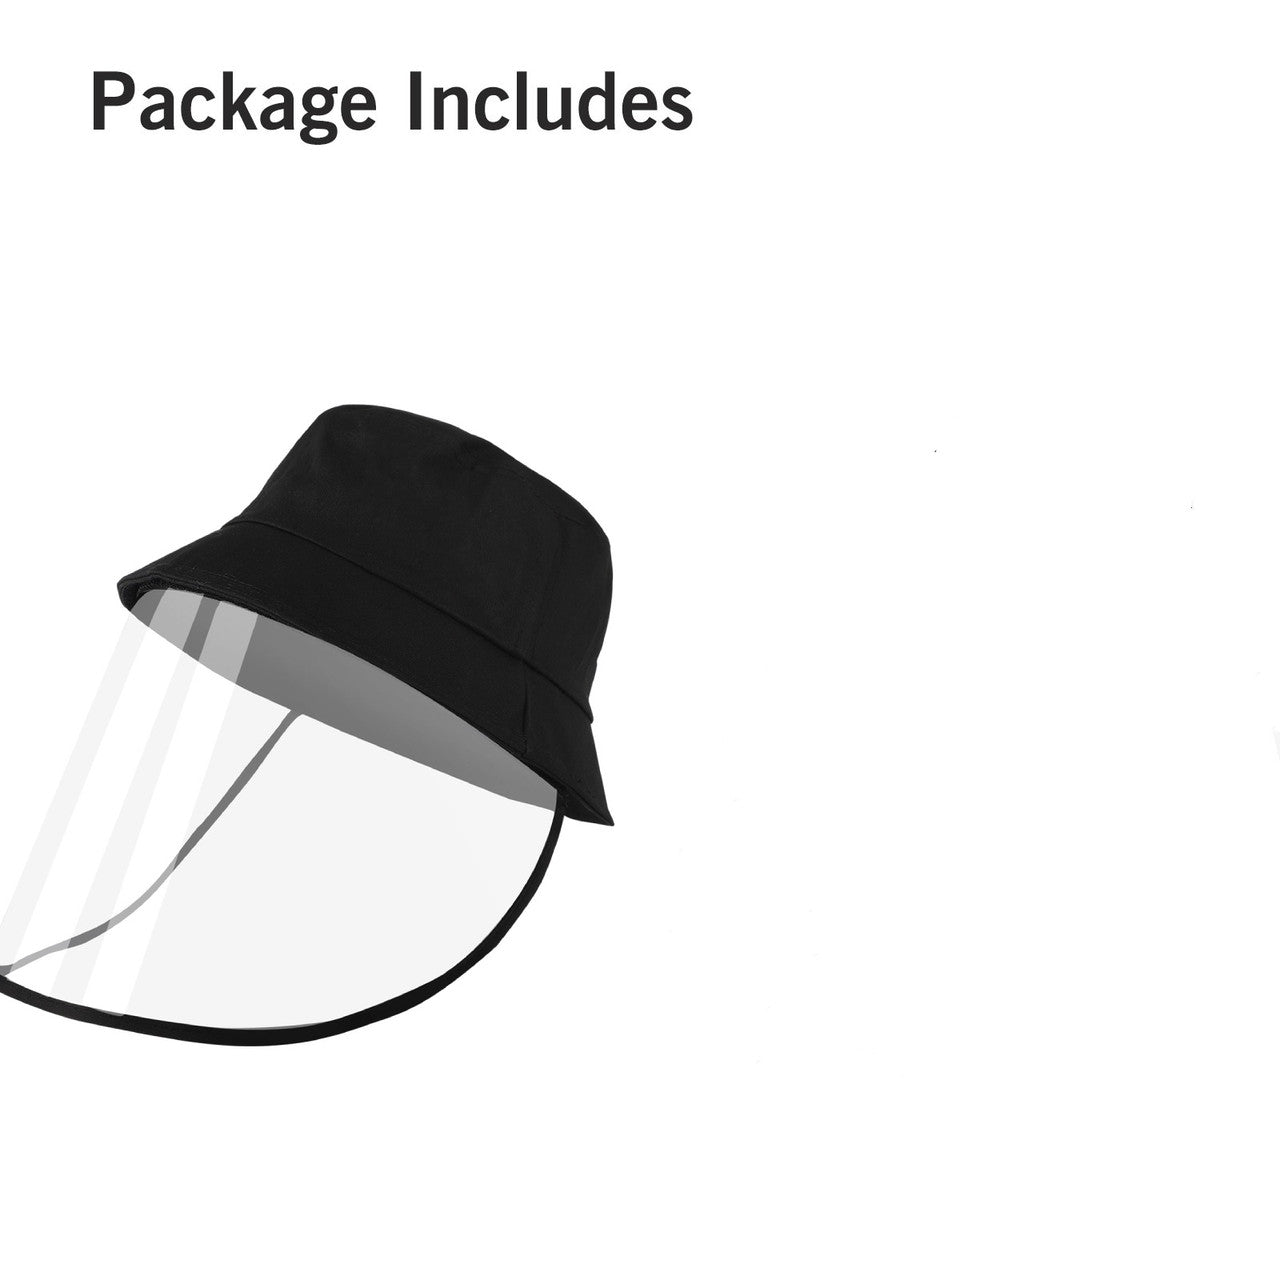 Fisherman Hat - with Removable Full Shield Outdoor Lightweight ，Safety Cover Sun Cap (Black)